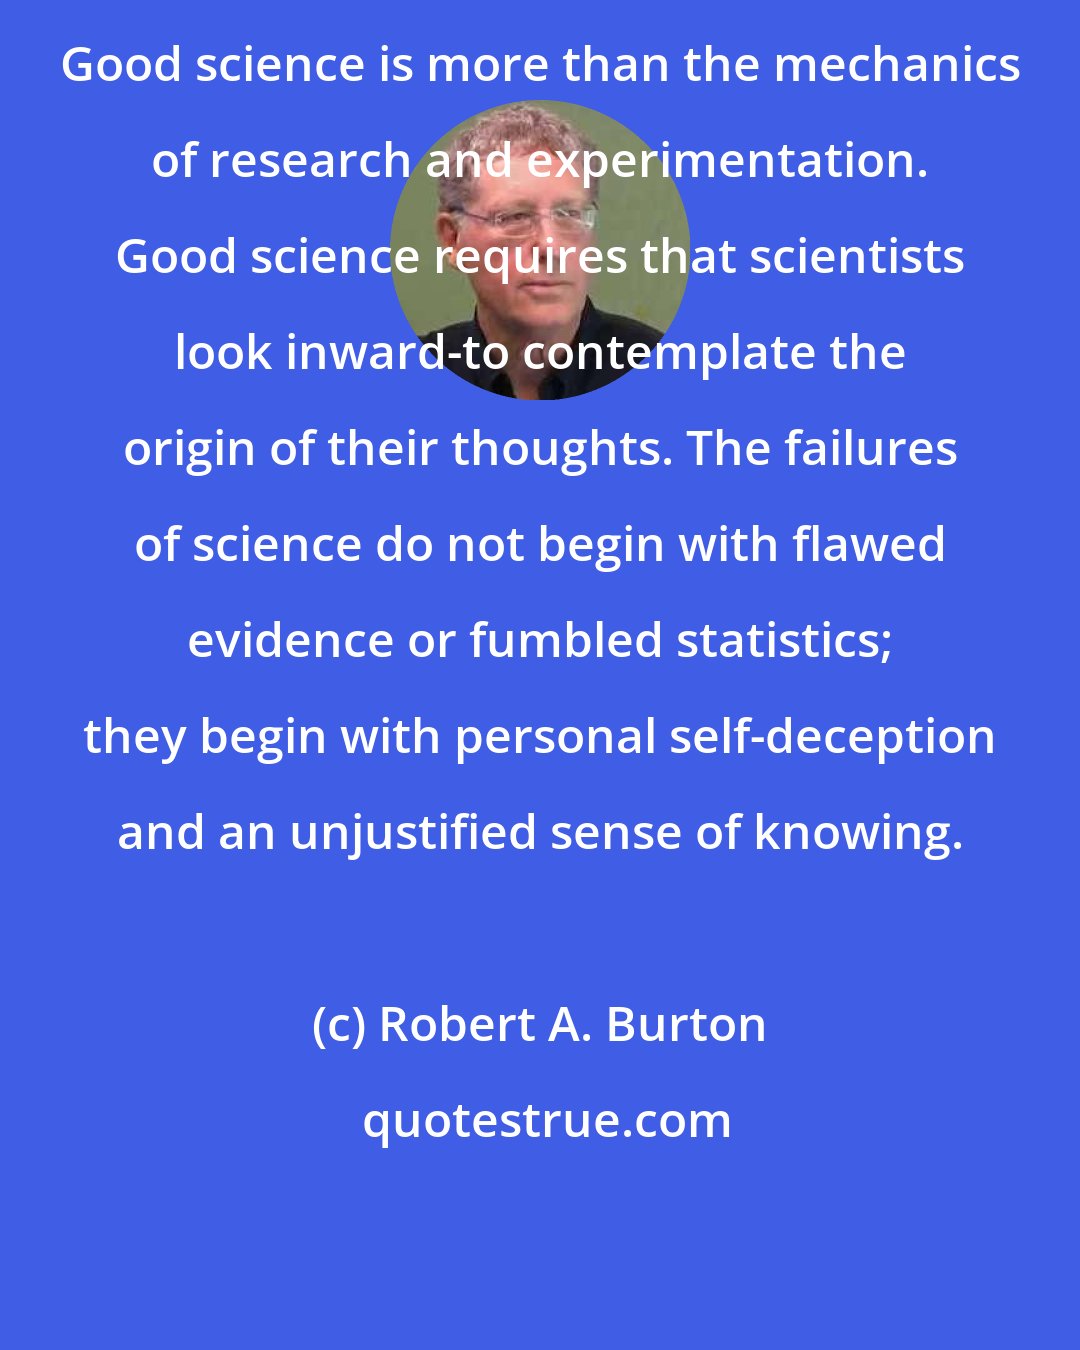 Robert A. Burton: Good science is more than the mechanics of research and experimentation. Good science requires that scientists look inward-to contemplate the origin of their thoughts. The failures of science do not begin with flawed evidence or fumbled statistics; they begin with personal self-deception and an unjustified sense of knowing.